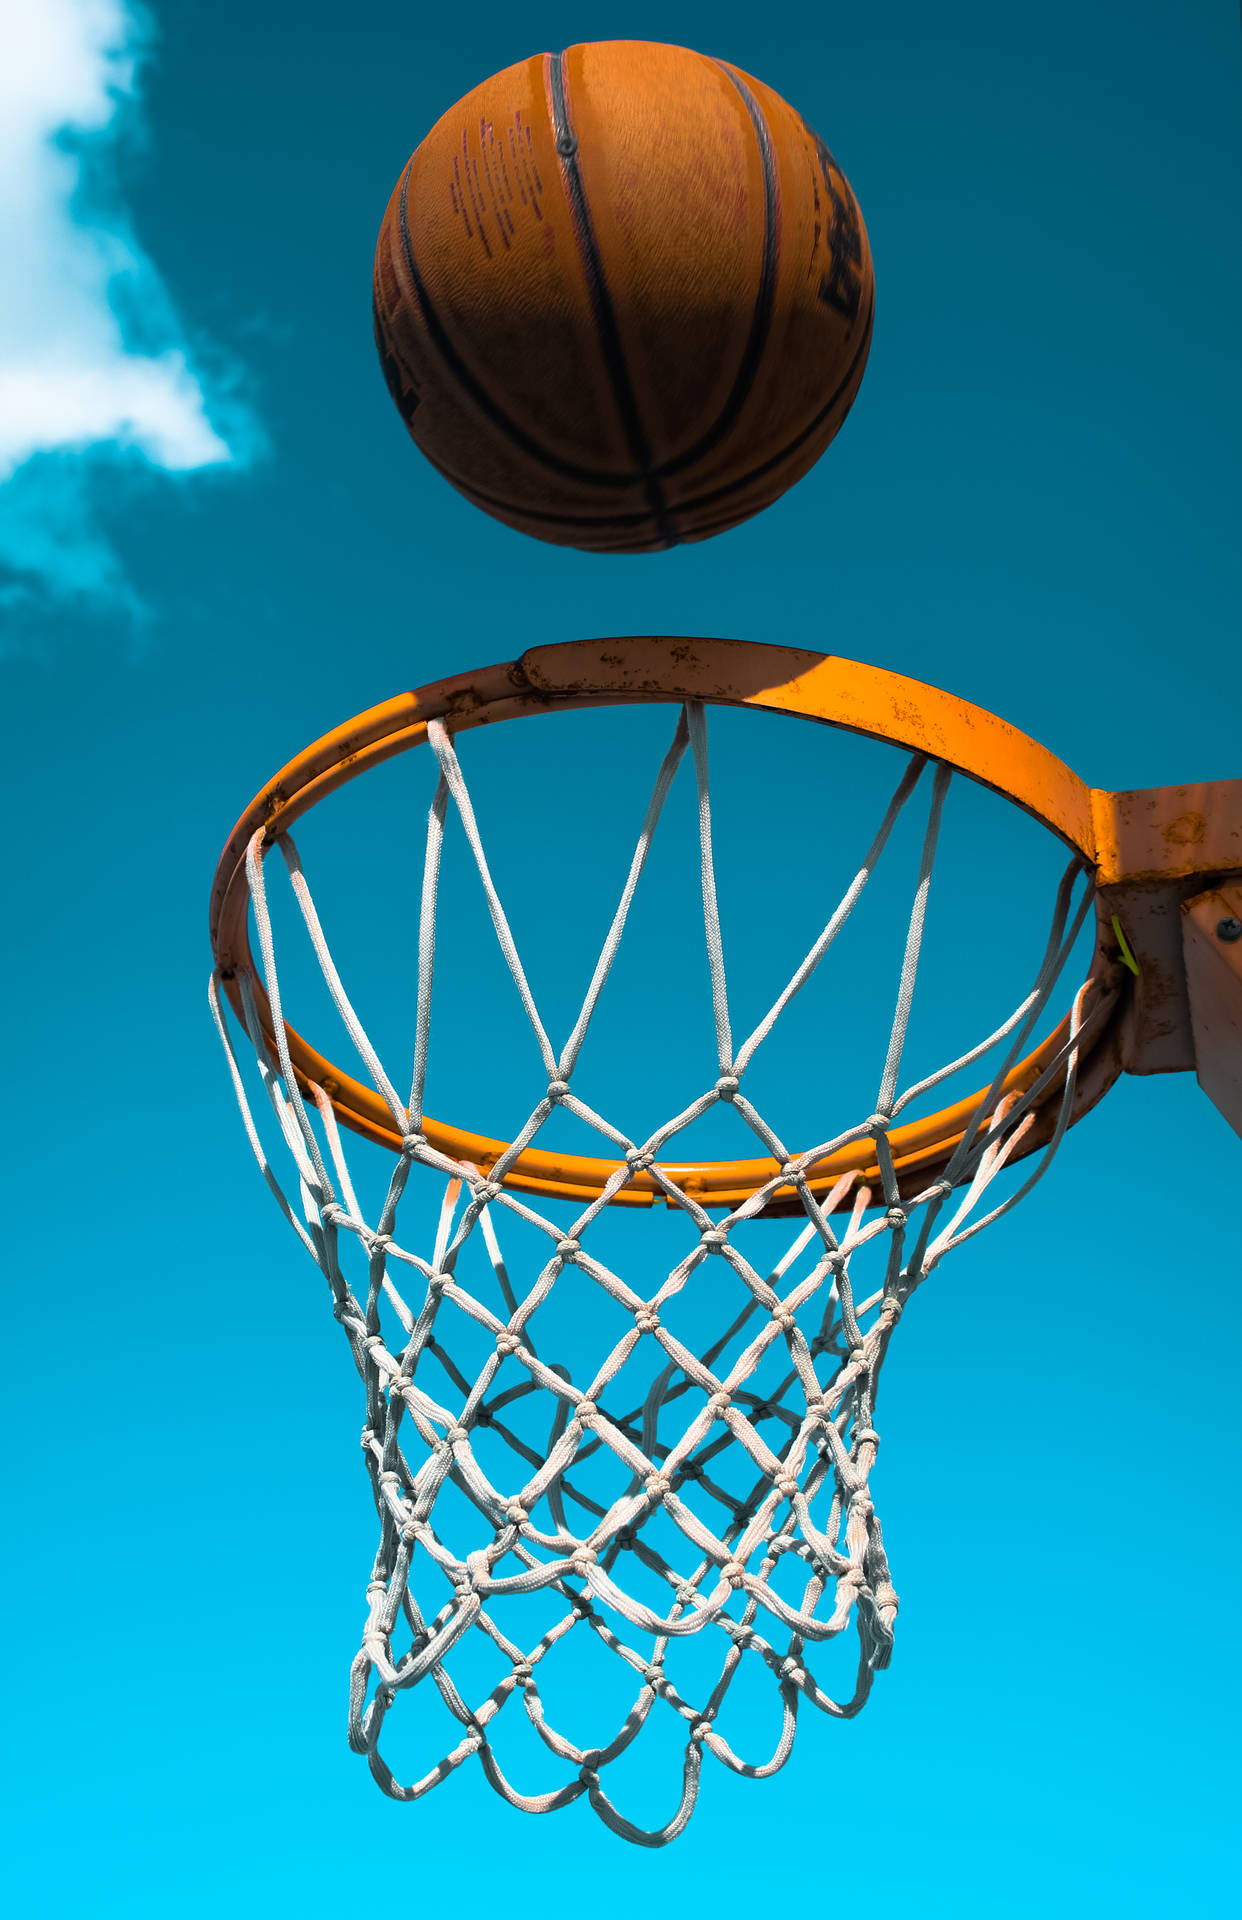 3352X5183 Basketball Wallpaper and Background